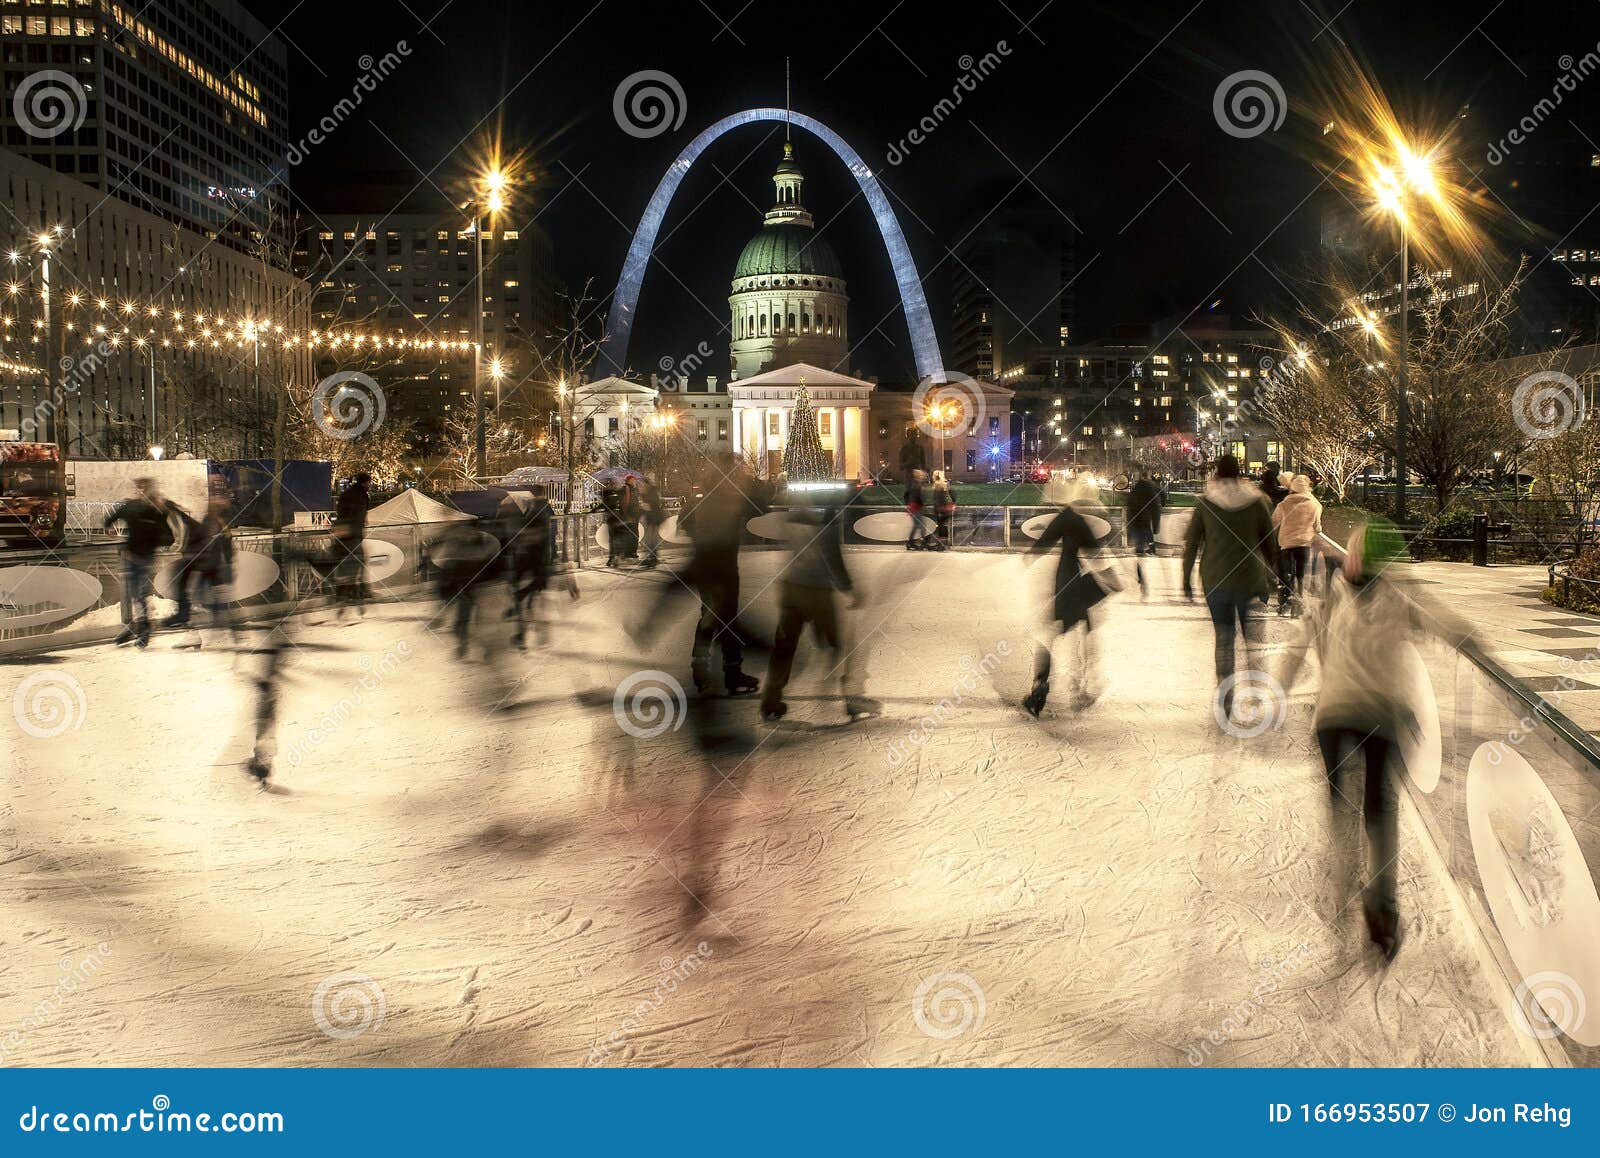 St Louis, Missouri, Usa, Dec 2019 - Men, Women And Kids Ice Skate On Rink In Front Of St Louis ...